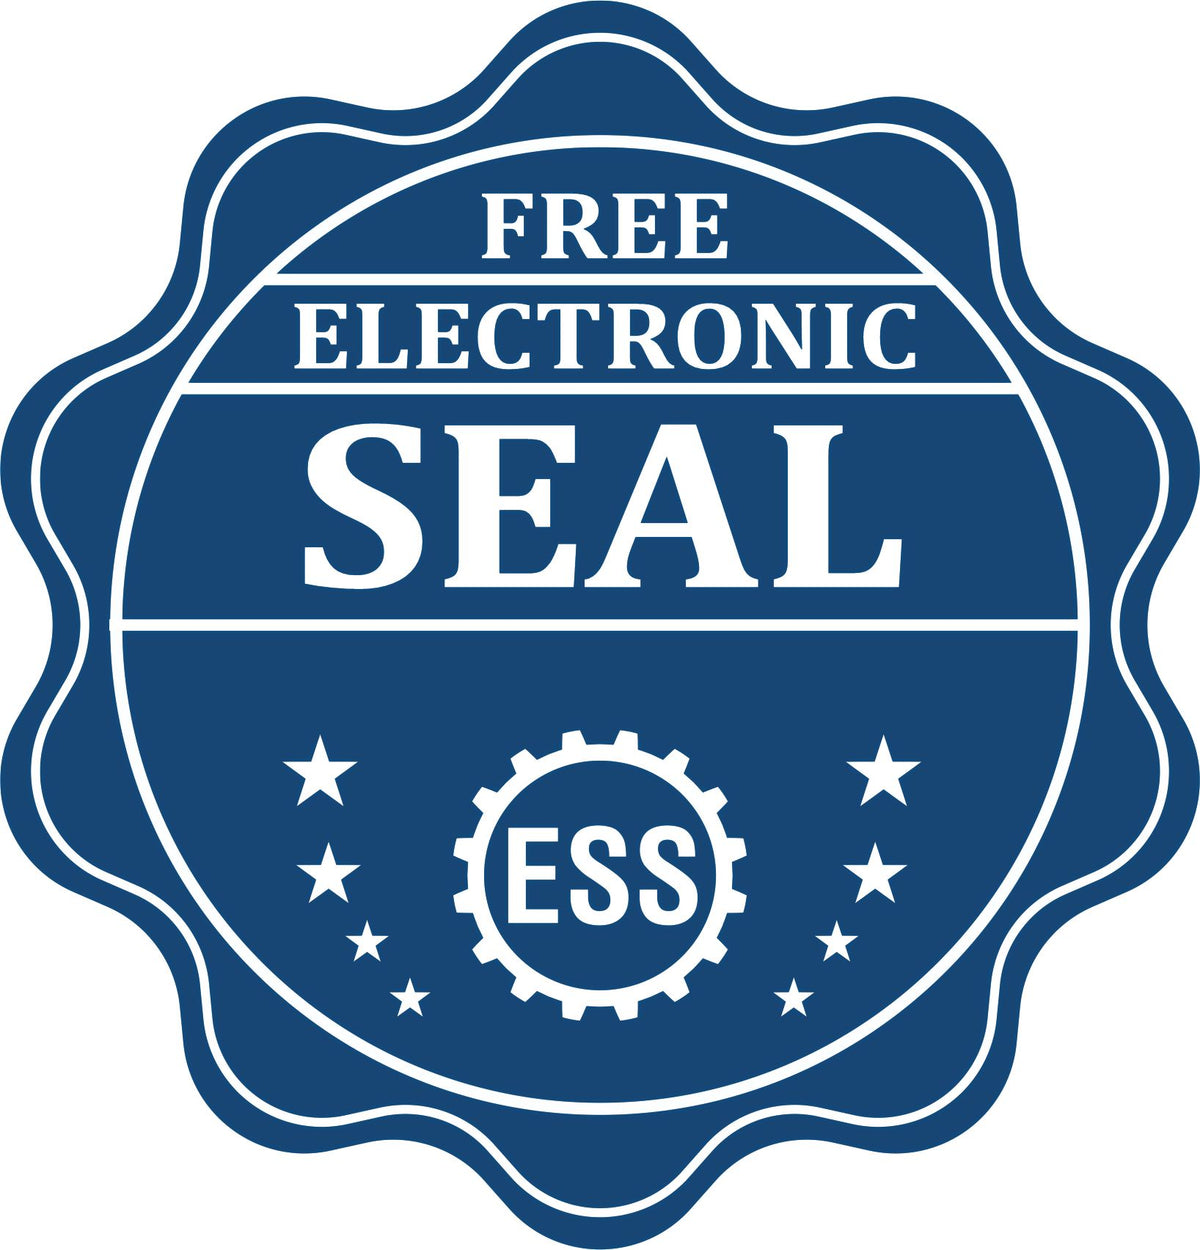 A badge showing a free electronic seal for the Long Reach West Virginia Geology Seal with stars and the ESS gear on the emblem.